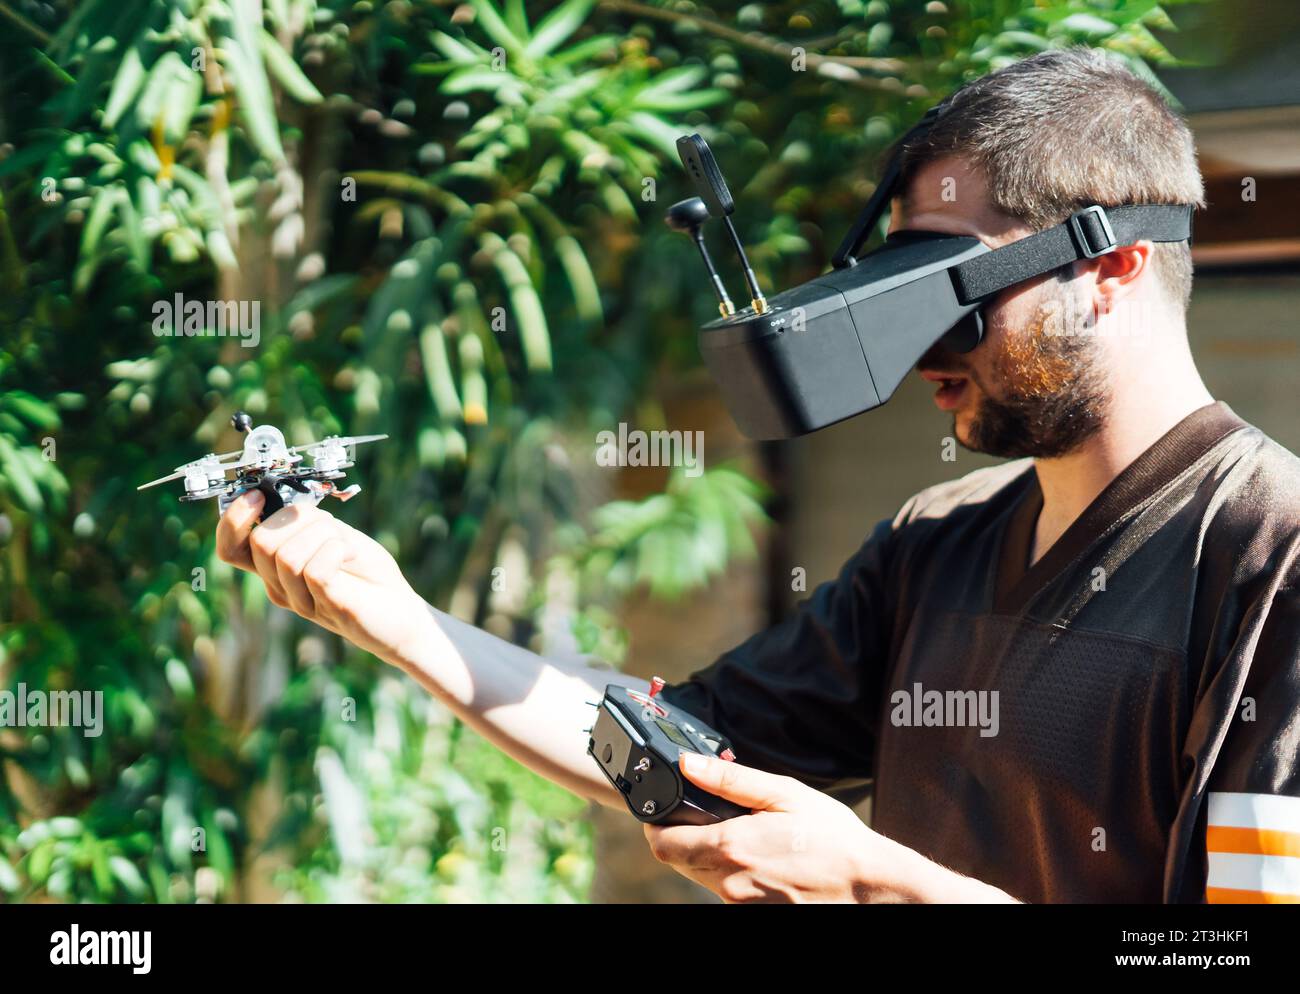 man holding a drone Stock Photo